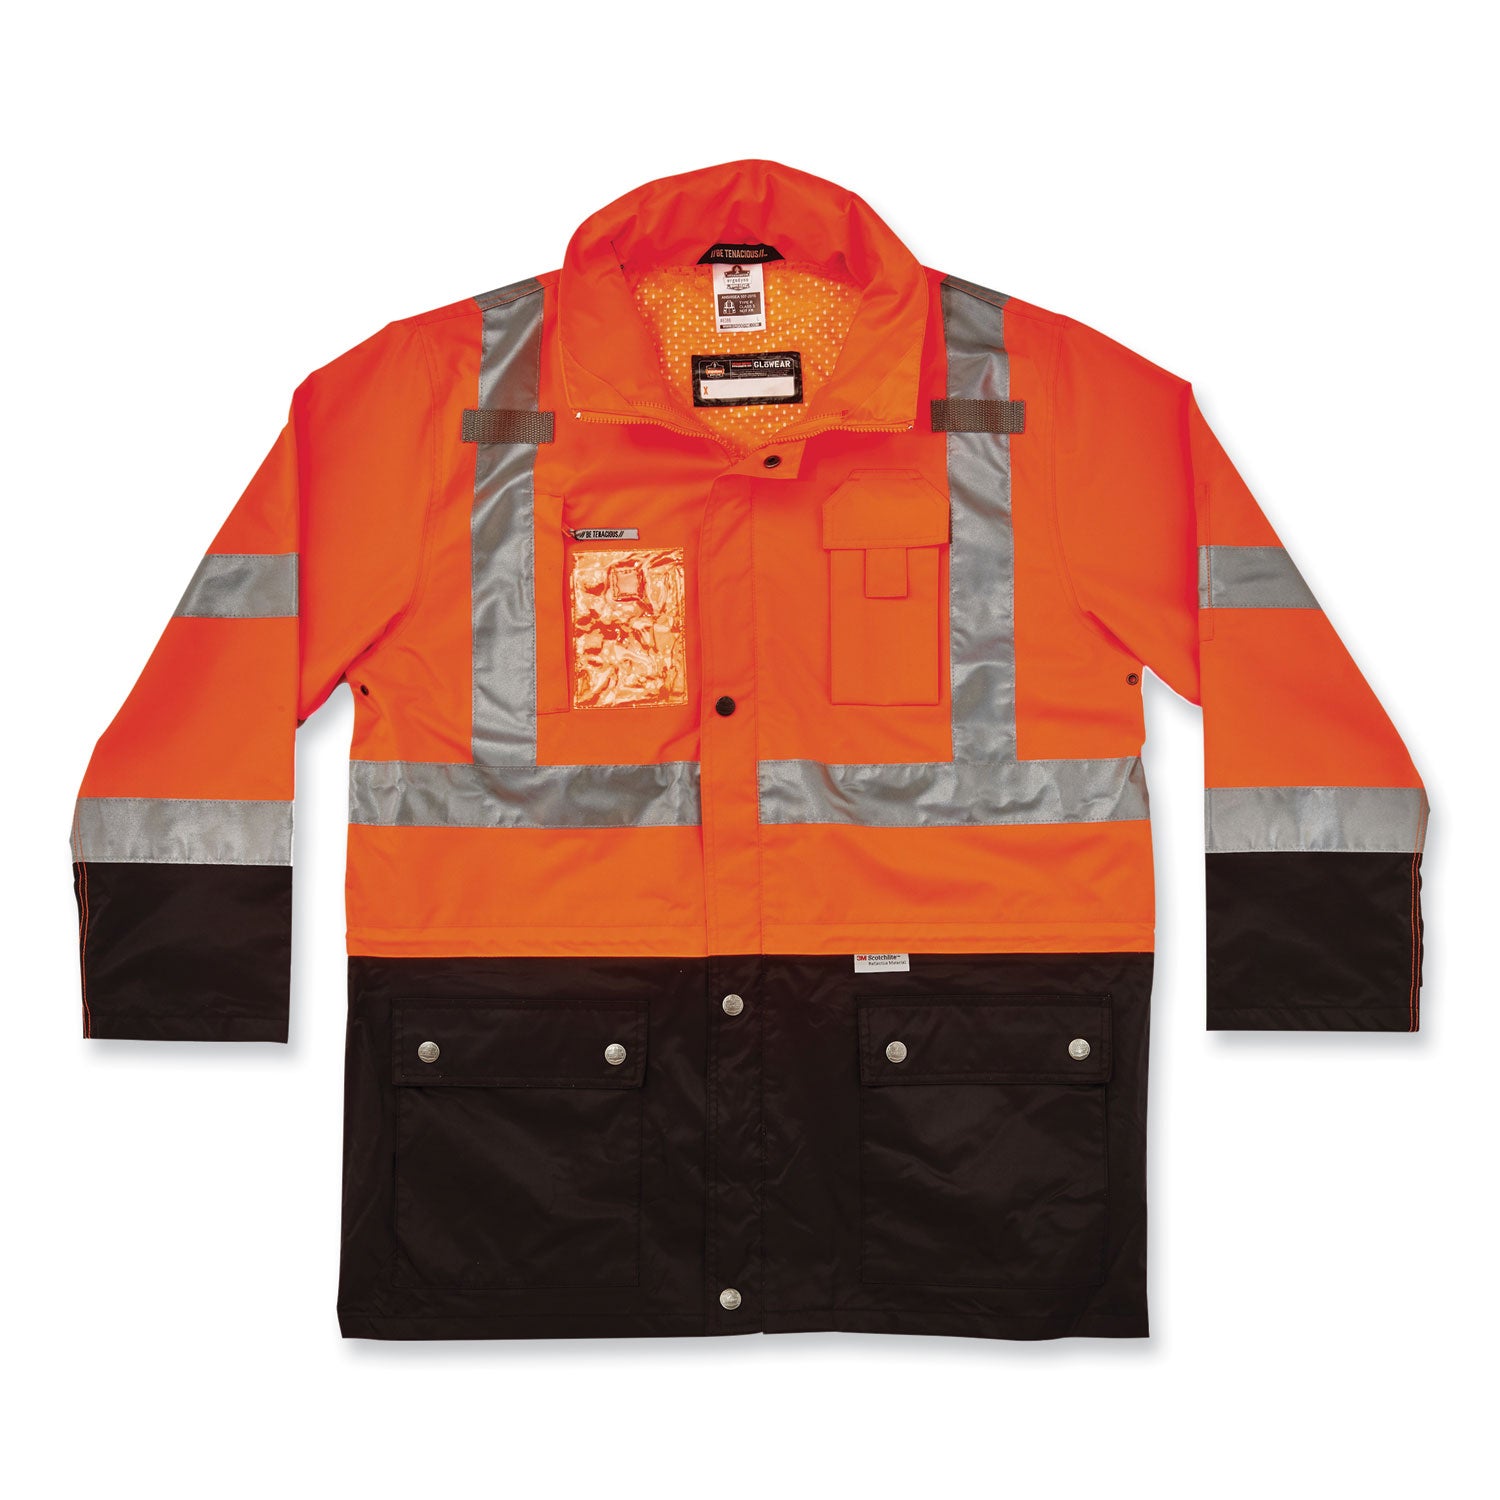 glowear-8386-class-3-hi-vis-outer-shell-jacket-polyester-2x-large-orange-ships-in-1-3-business-days_ego25466 - 1